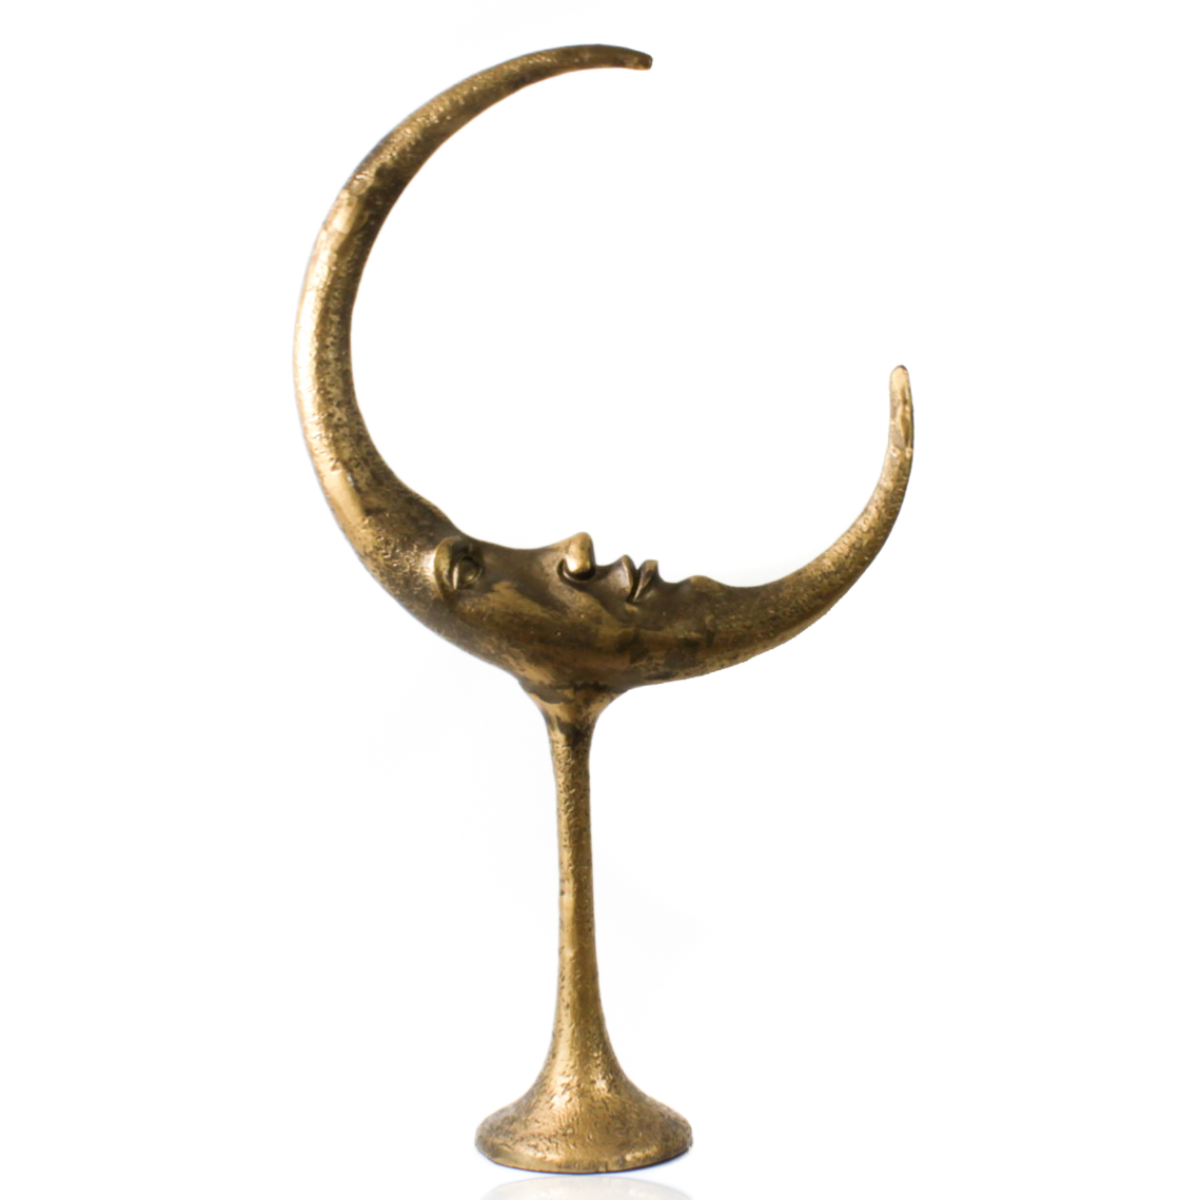 Vintage Moon Shape Sculpture, hand made, brass finish, large size